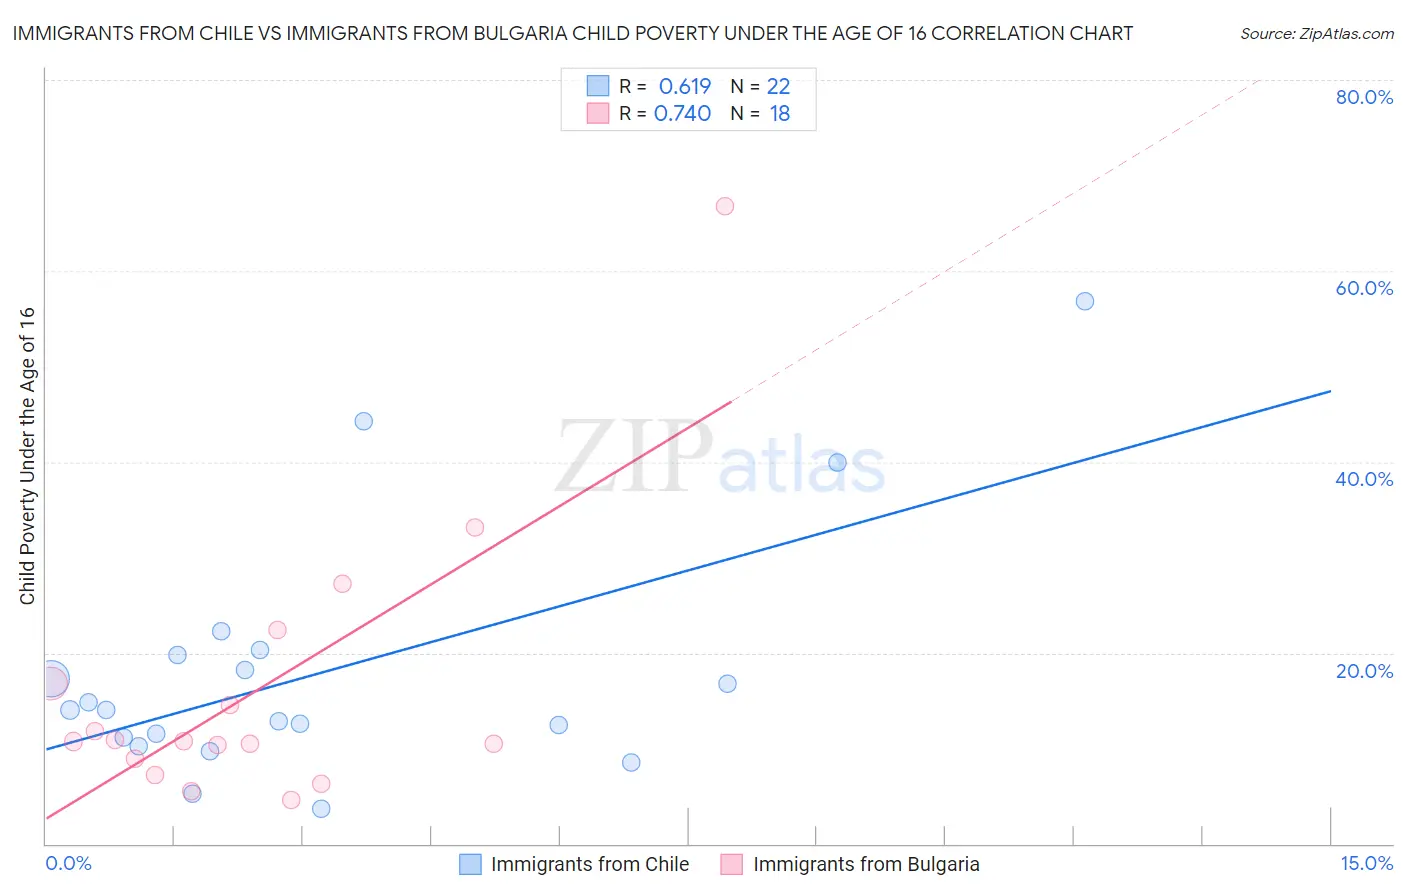 Immigrants from Chile vs Immigrants from Bulgaria Child Poverty Under the Age of 16